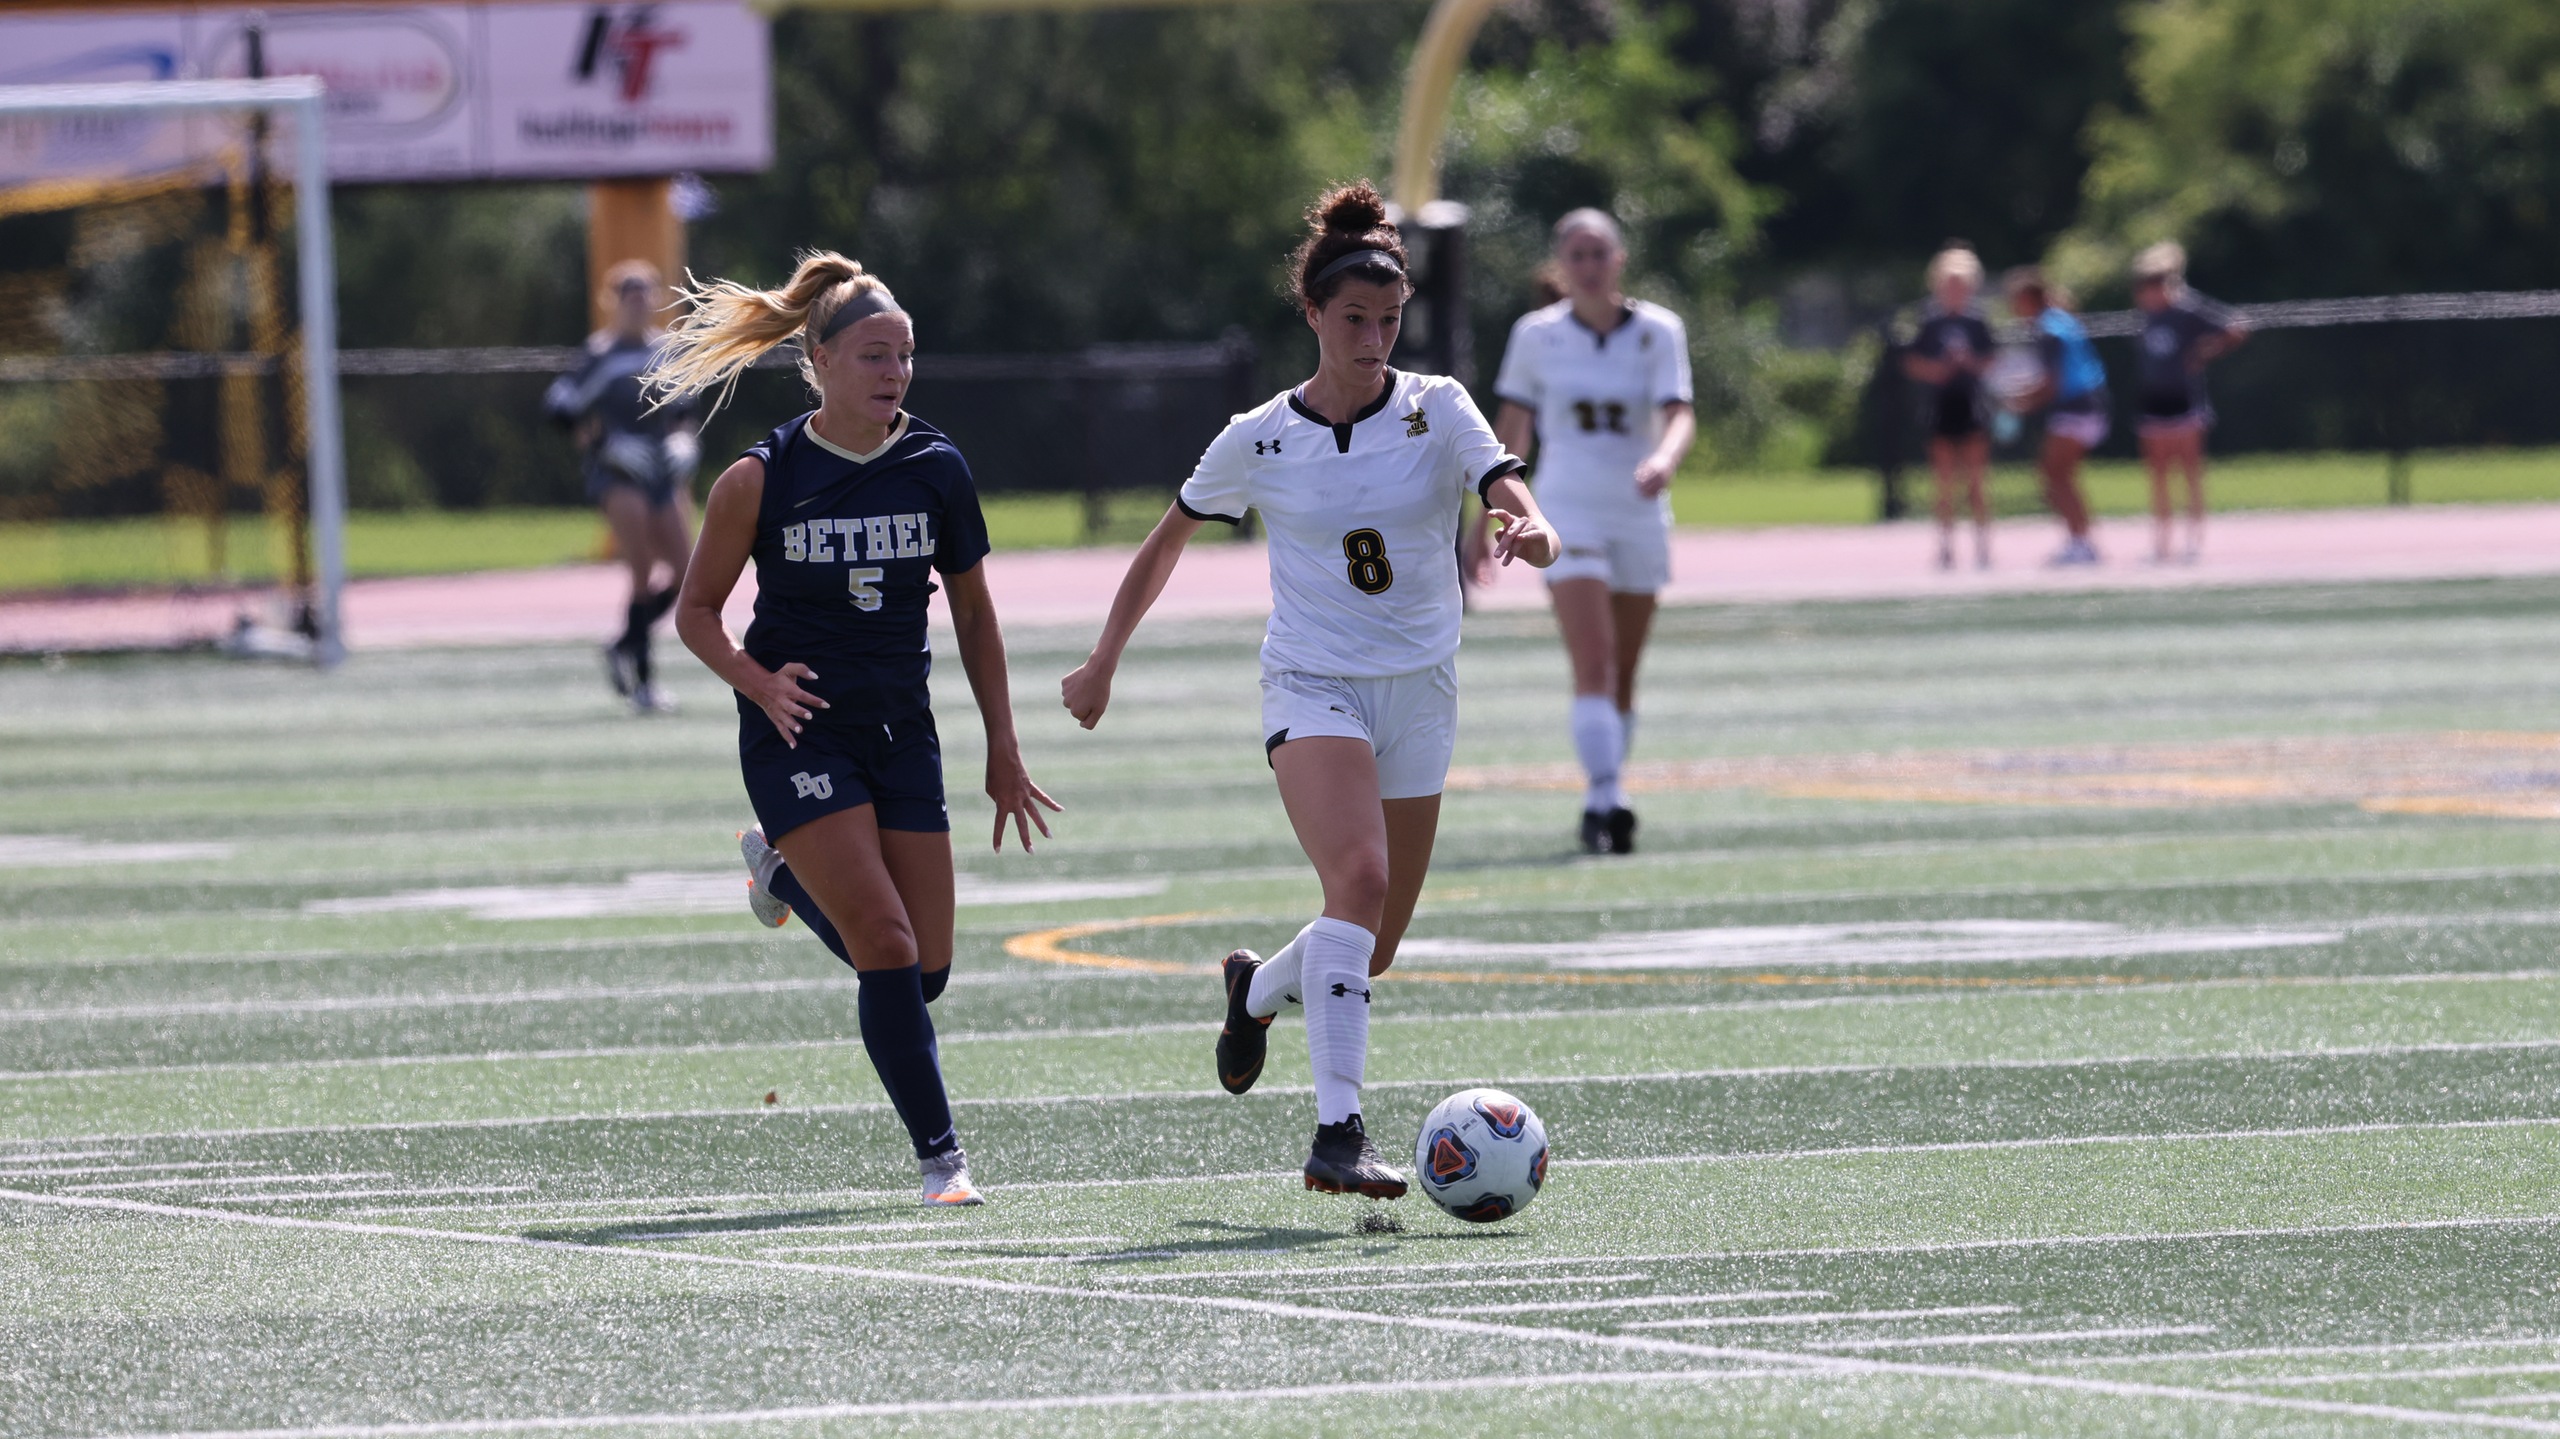 Maddie Hill opened UW-Oshkosh's scoring against the Royals with her goal in the 10th minute of play.